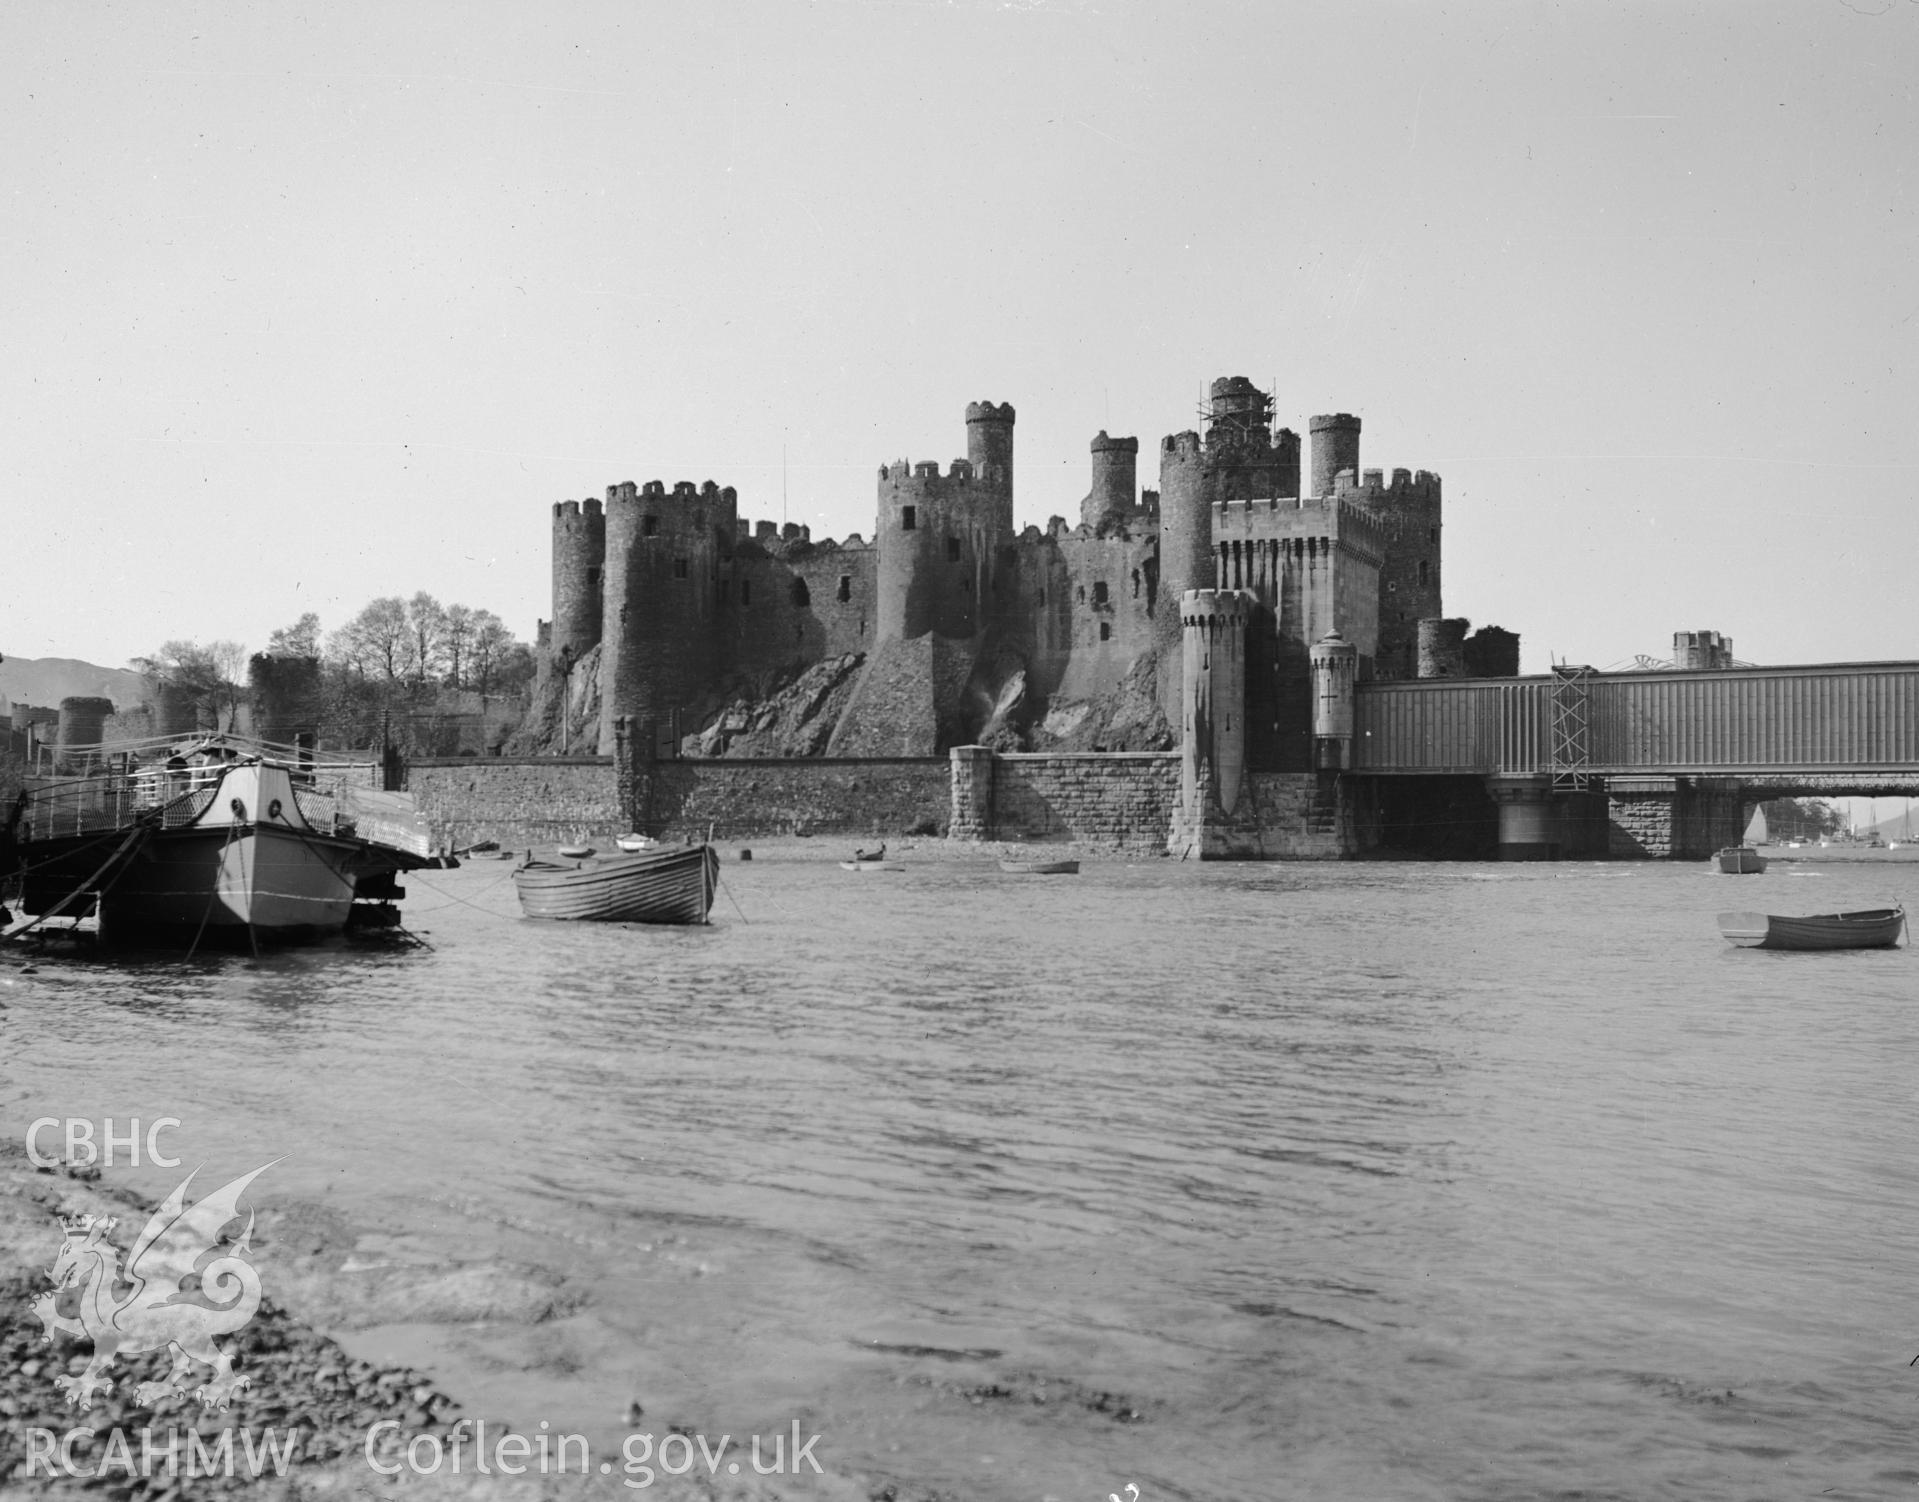 View of Conwy Castle from across the river, taken in 10.09.1951.